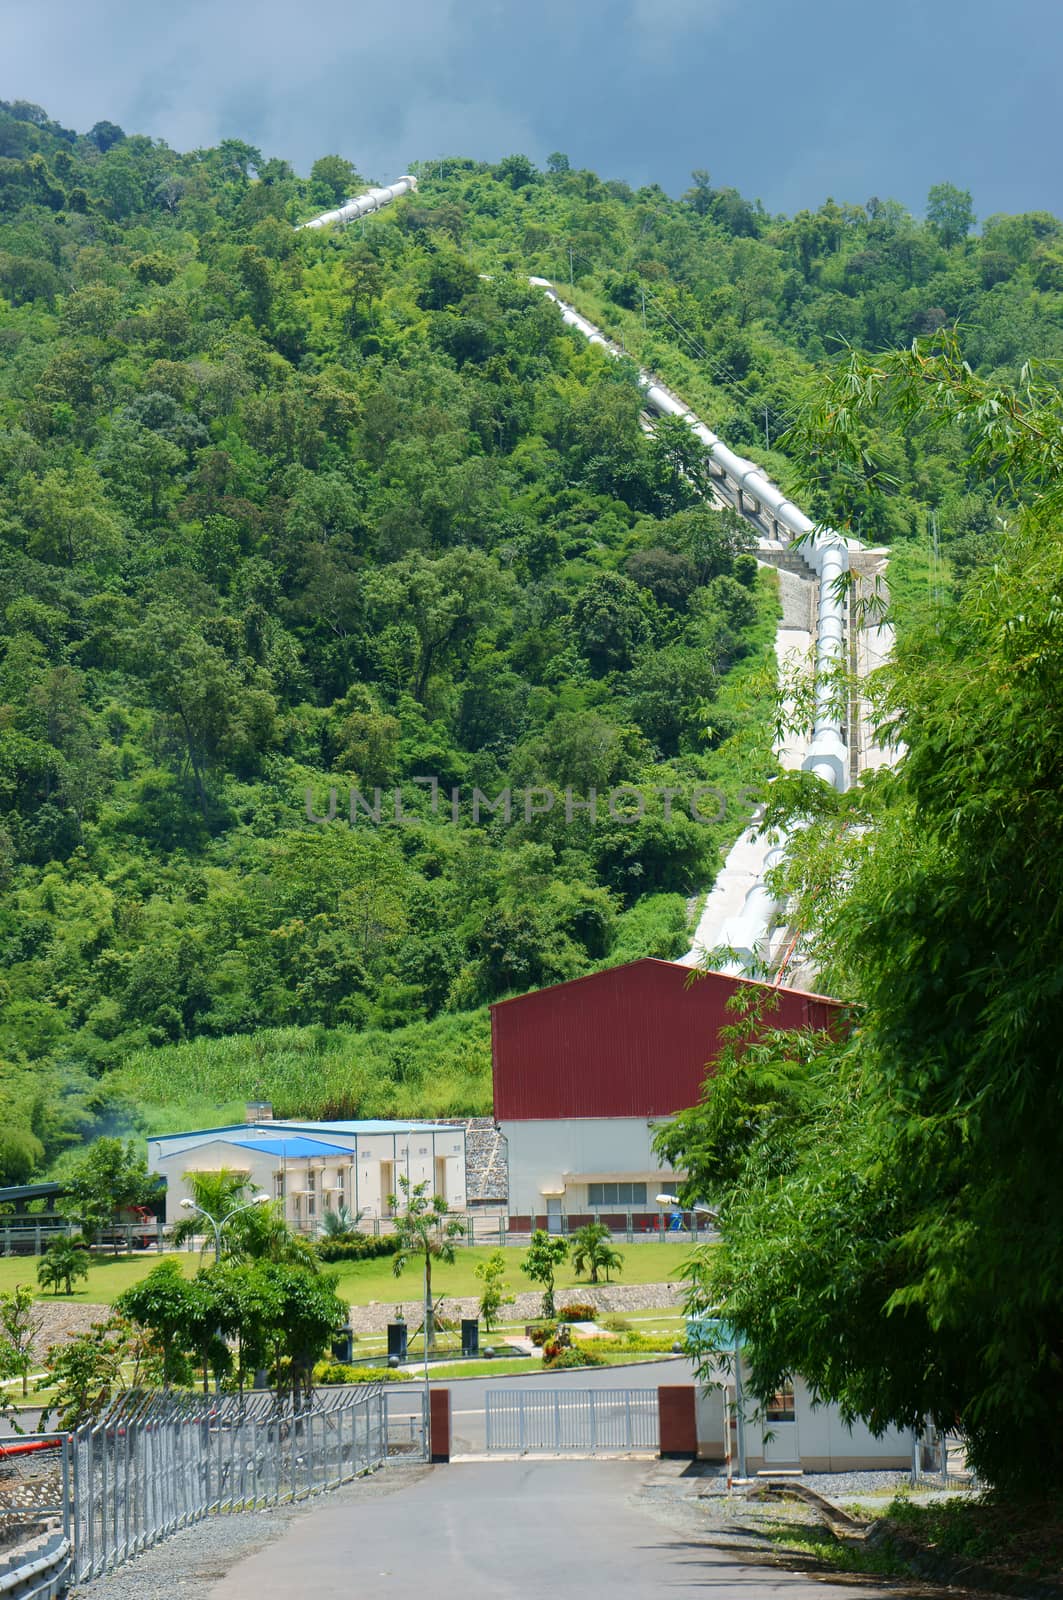 Dai Ninh hydroelectric power plant at Vietnam countryside, plant with water pipe system cross green mountain, up to sky, Vietnam has many hydroelectric power station